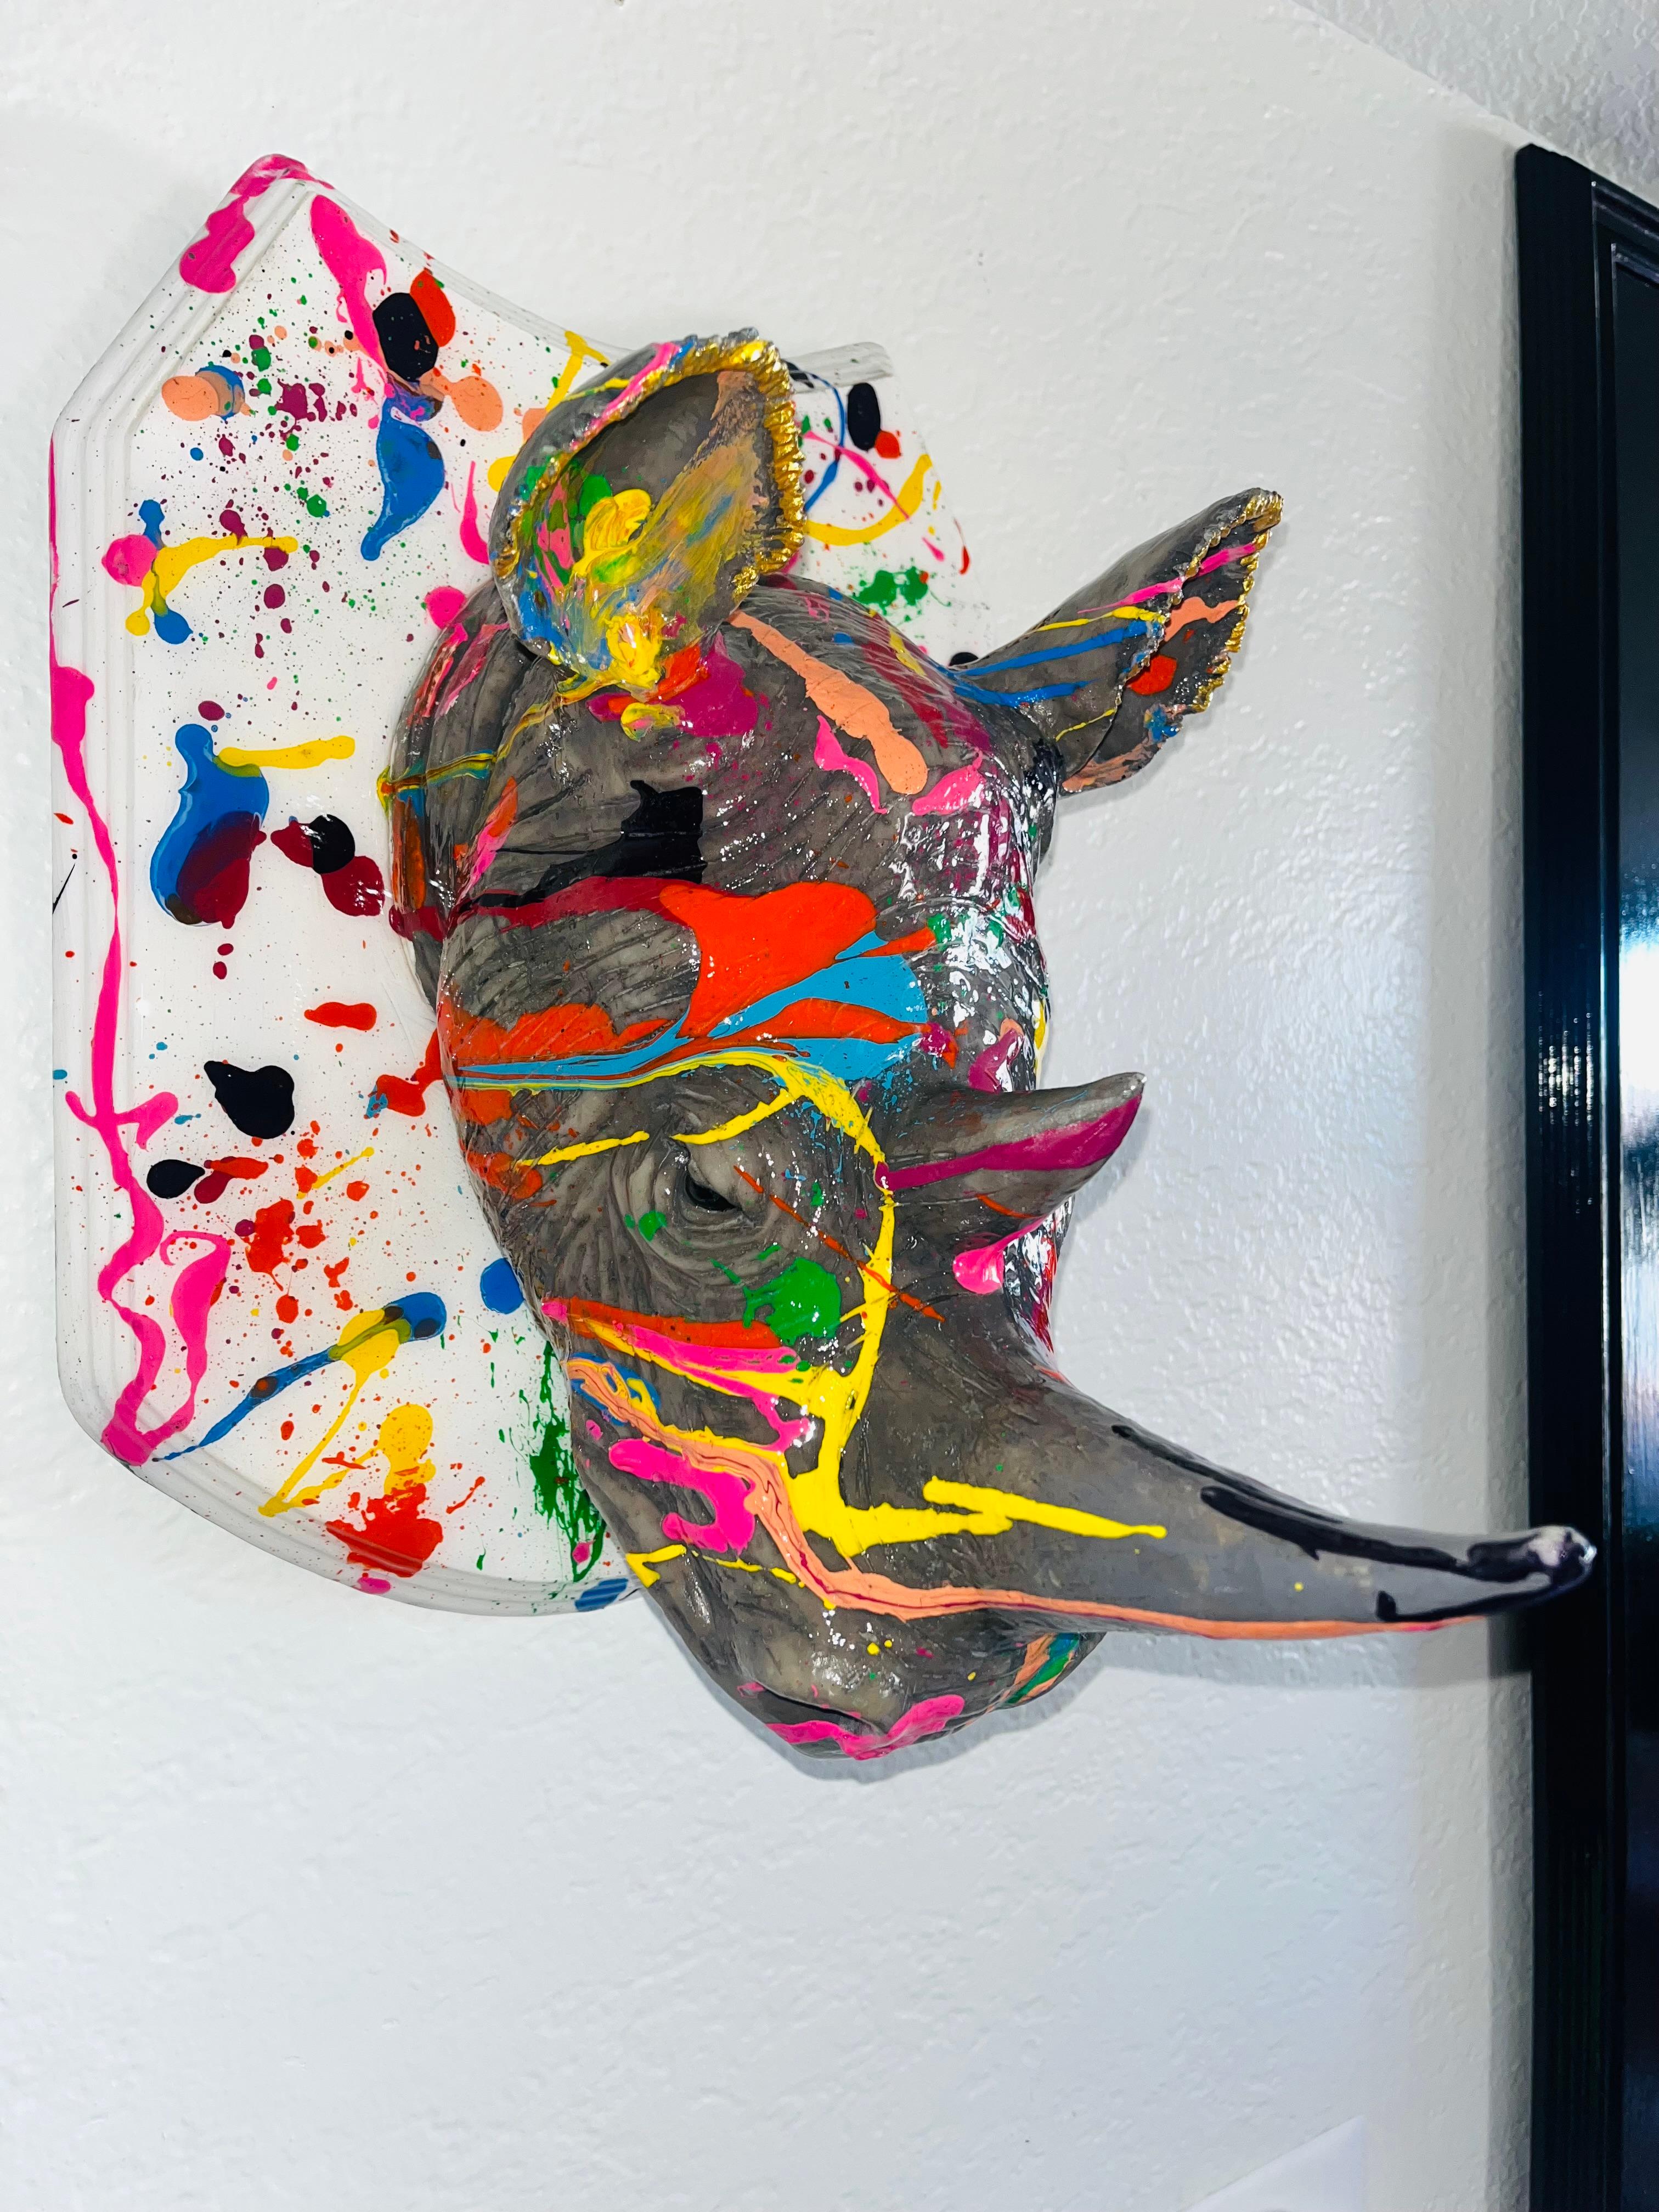                  **ANNUAL SUPER SALE TIL JUNE 15th ONLY**
*This Price Won't Be Repeated Again This Year - Take Advantage Of It*

Pop Focus Rhino is one of a kind wall sculpture.

Rhinos are symbol of focus, discipline and dedication.

Acrylic Paint